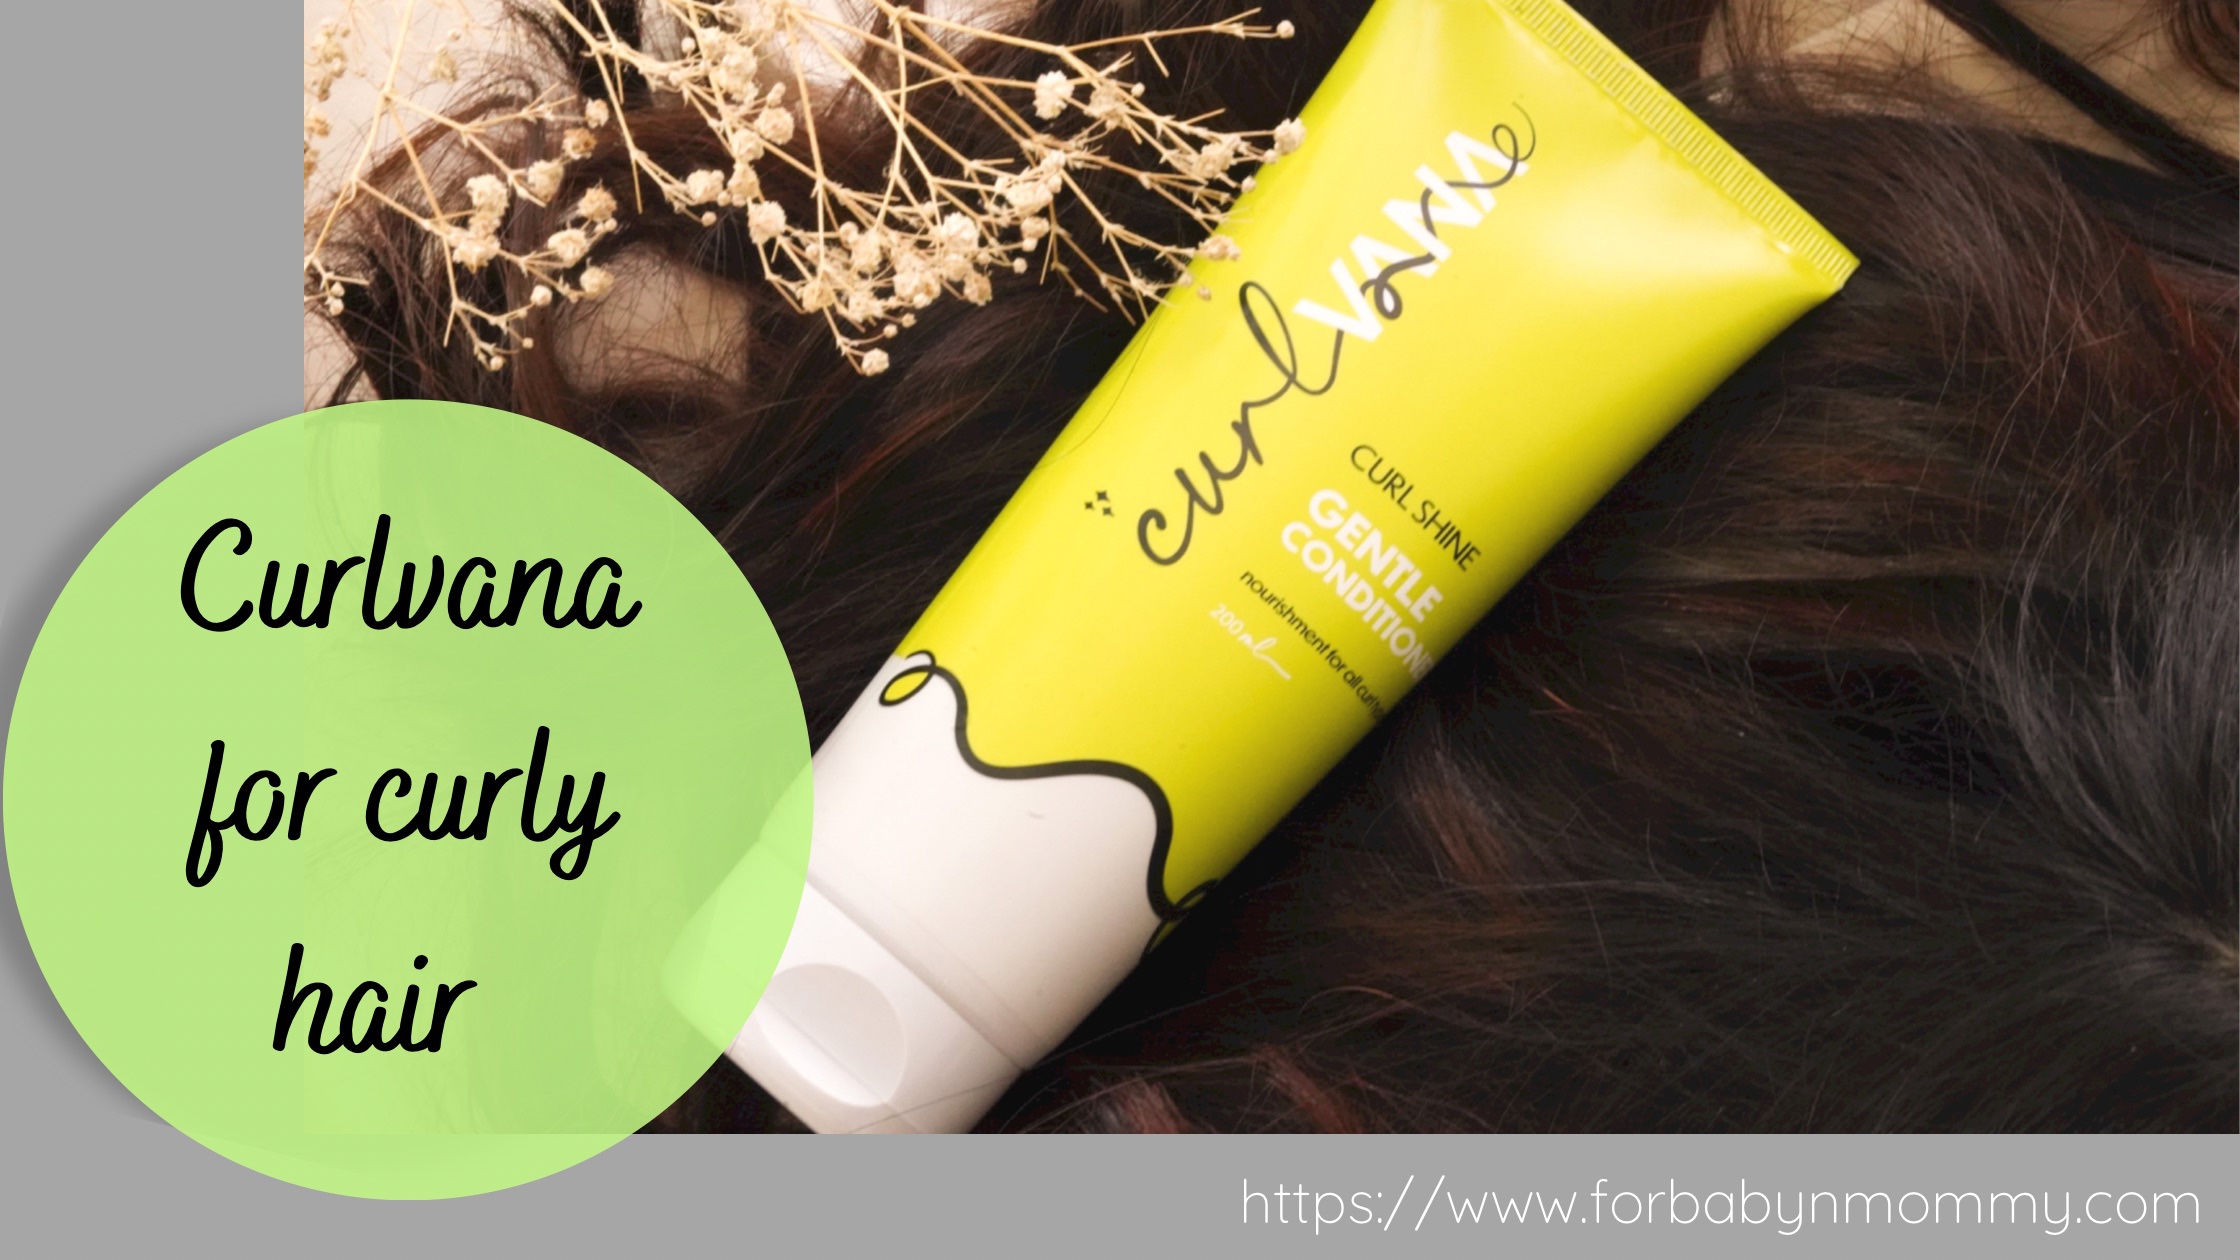 How To Choose The Right Shampoo for Curly Hair – Curlvana Fortifying Curl Cleanser Review?